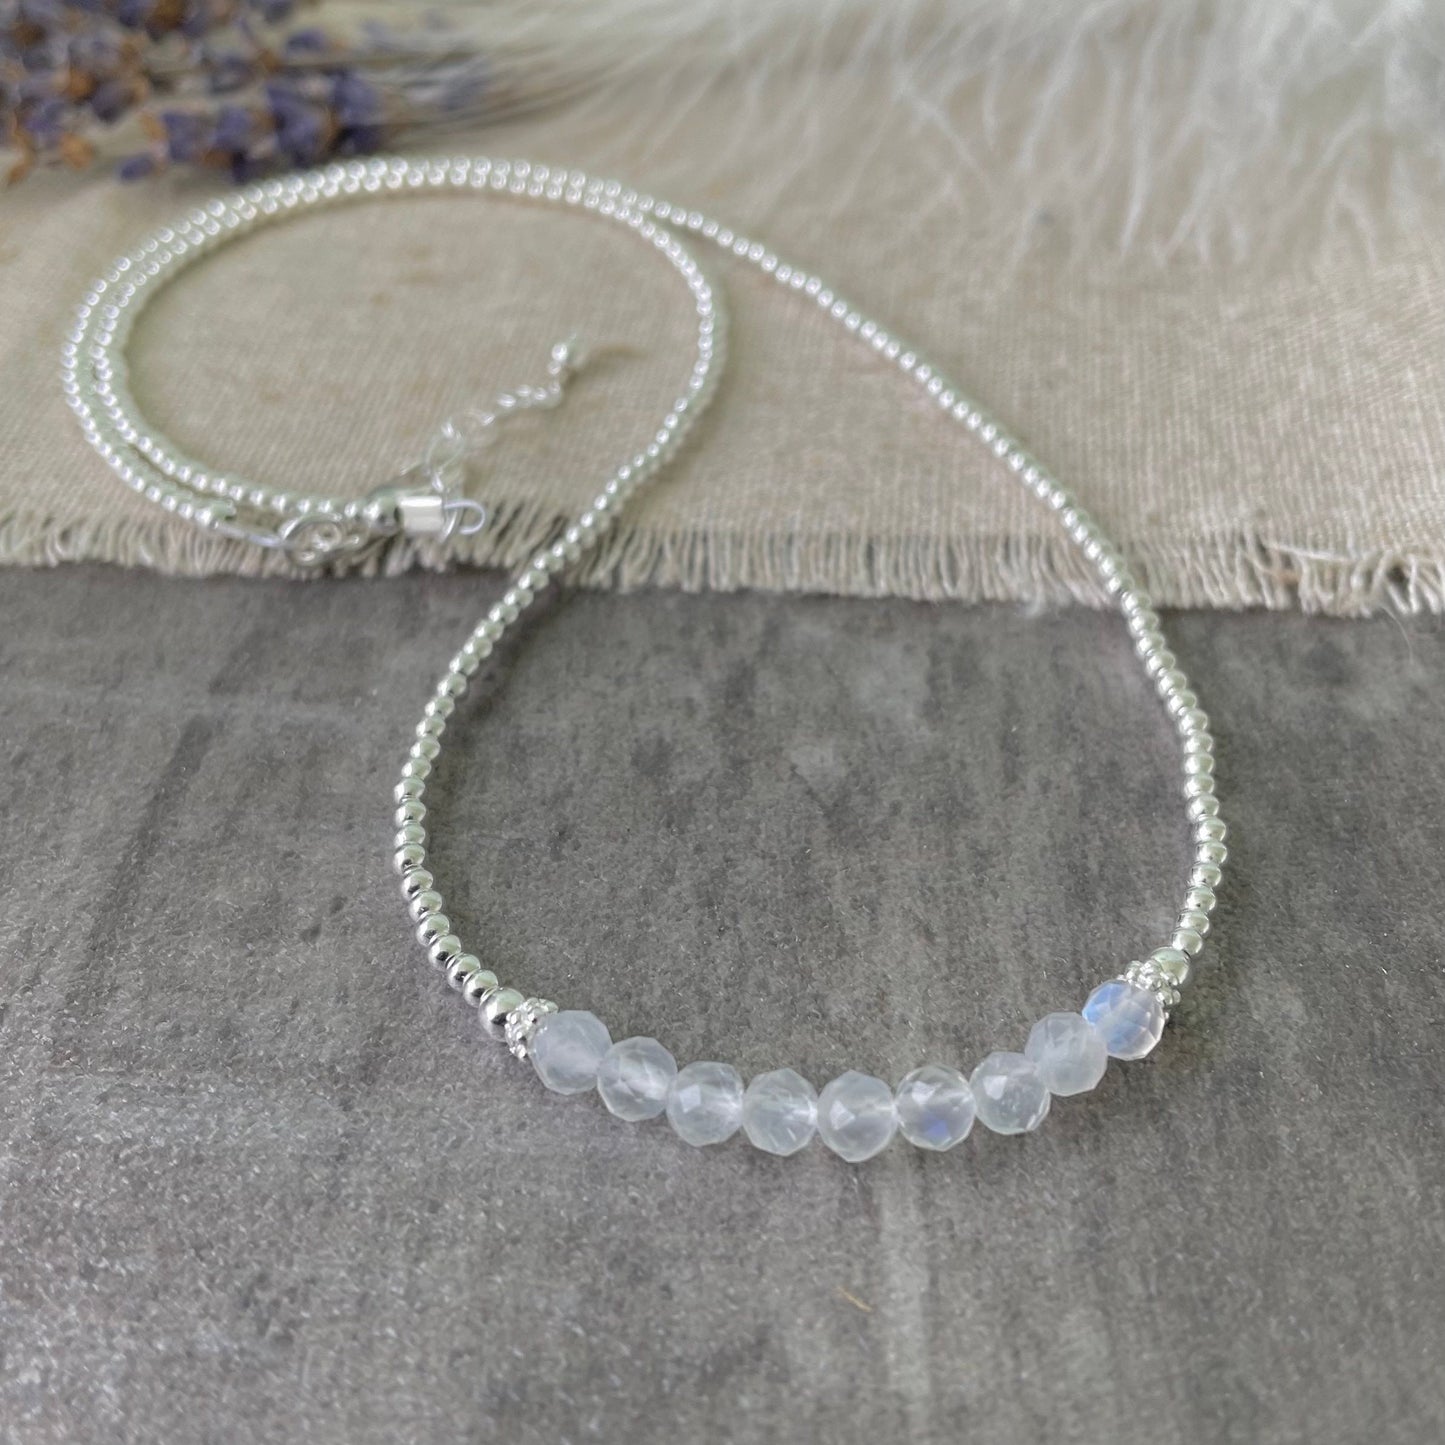 Thin Moonstone and Sterling Silver Bead Necklace, June Birthstone